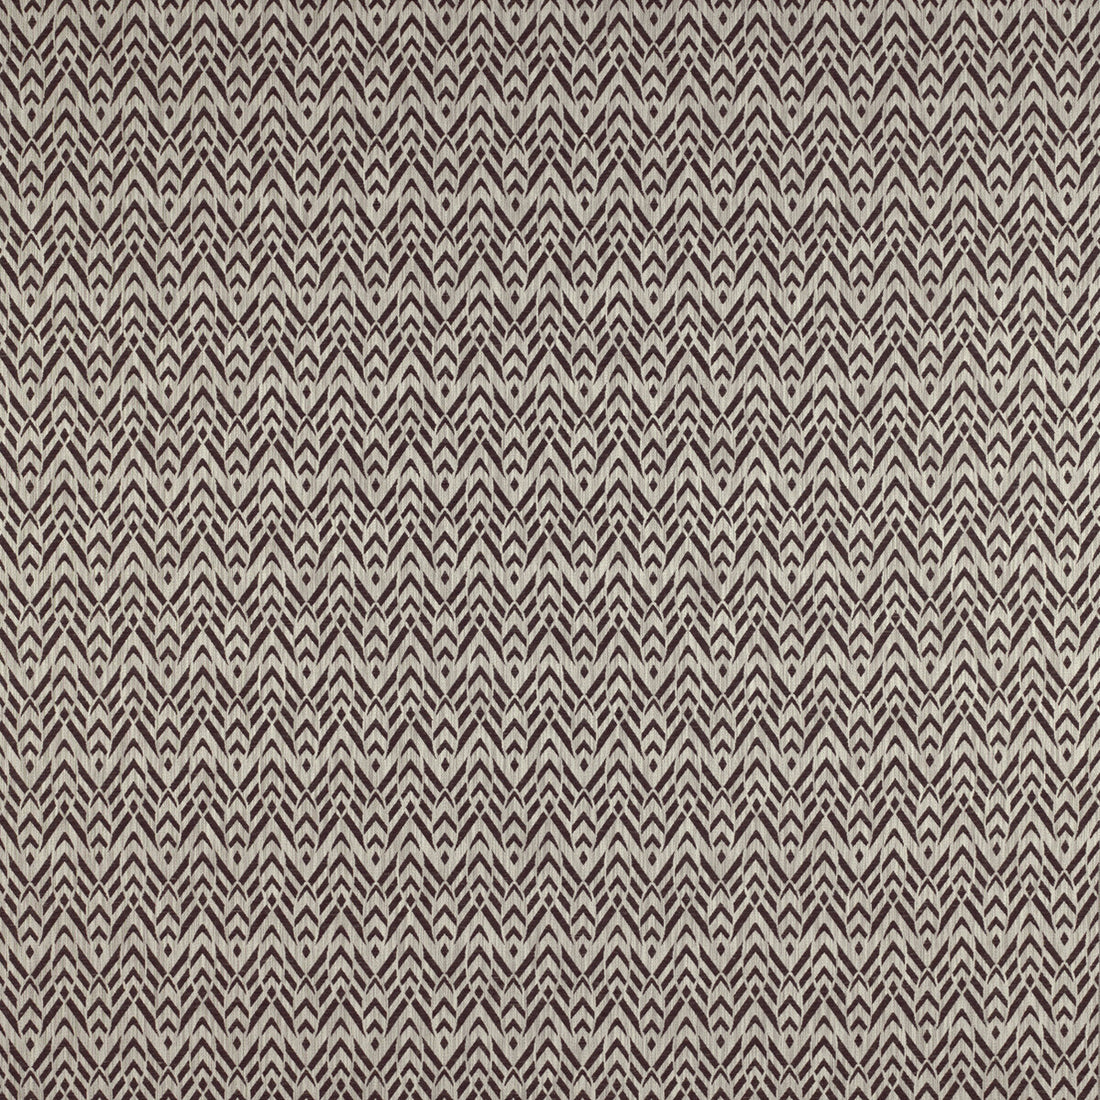 Cervantes fabric in chocolate color - pattern GDT5200.011.0 - by Gaston y Daniela in the Madrid collection